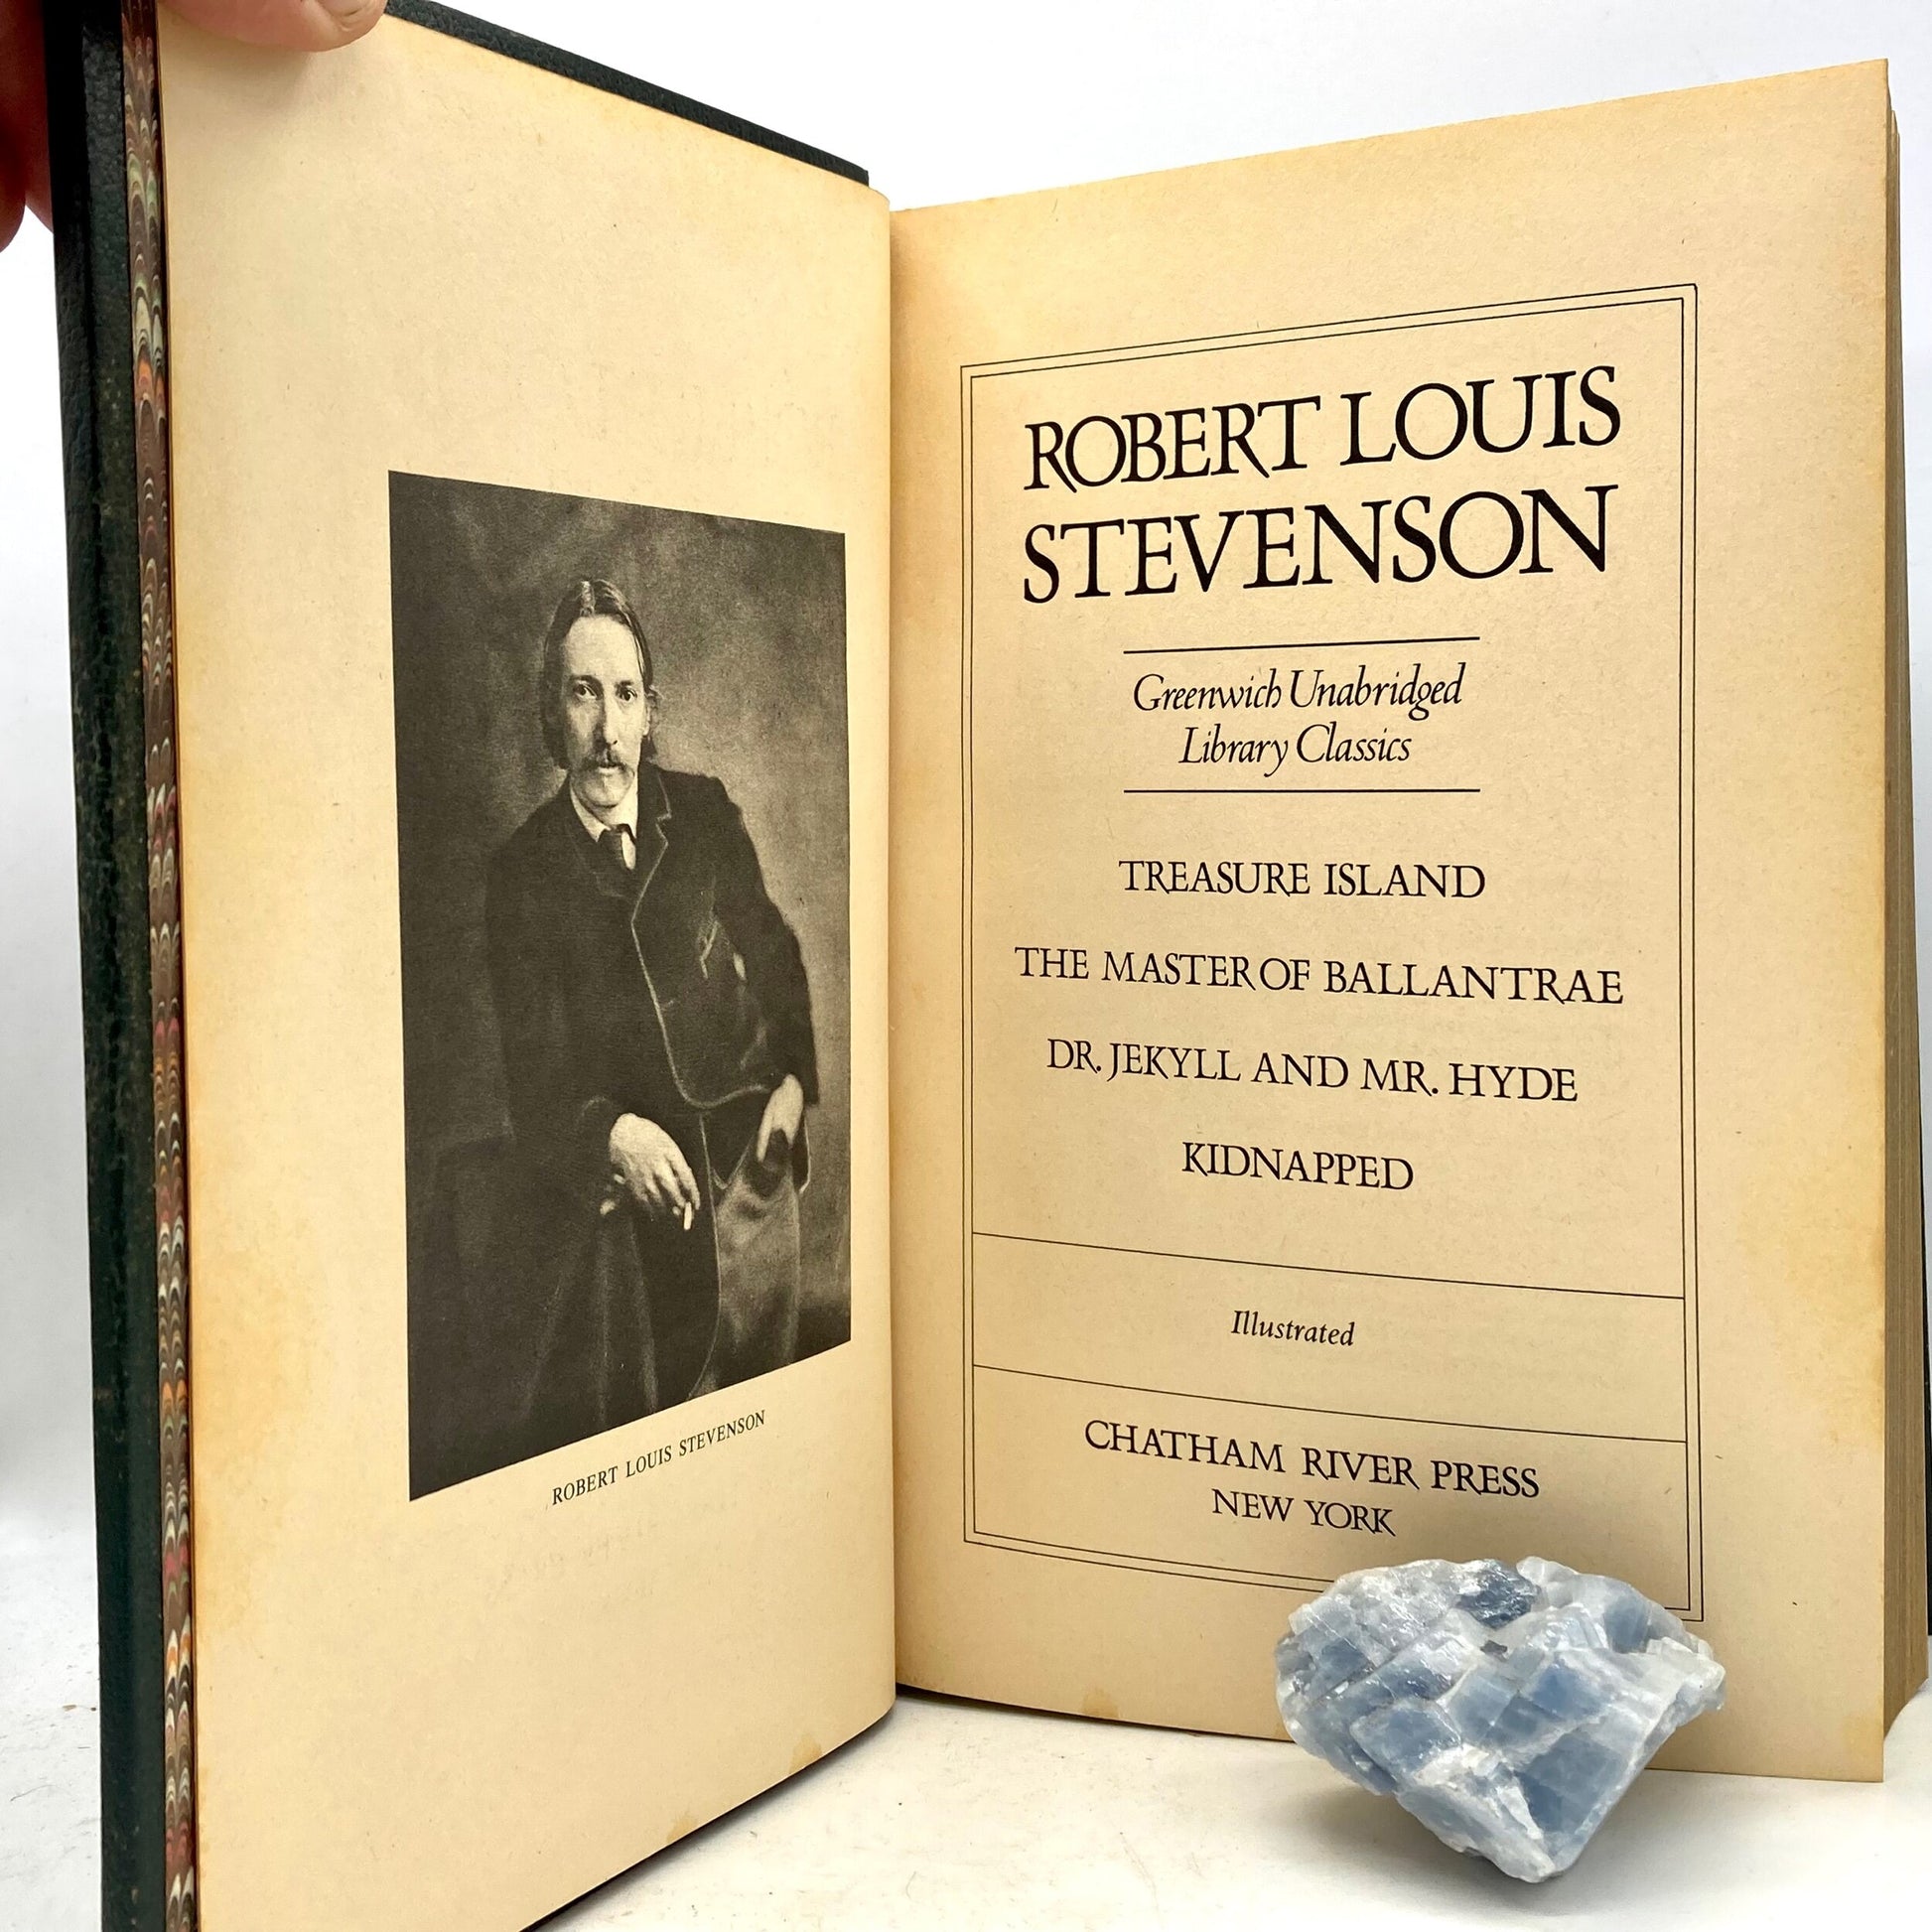 STEVENSON, Robert Louis "Collected Works" [Chatham River Press, 1983] - Buzz Bookstore